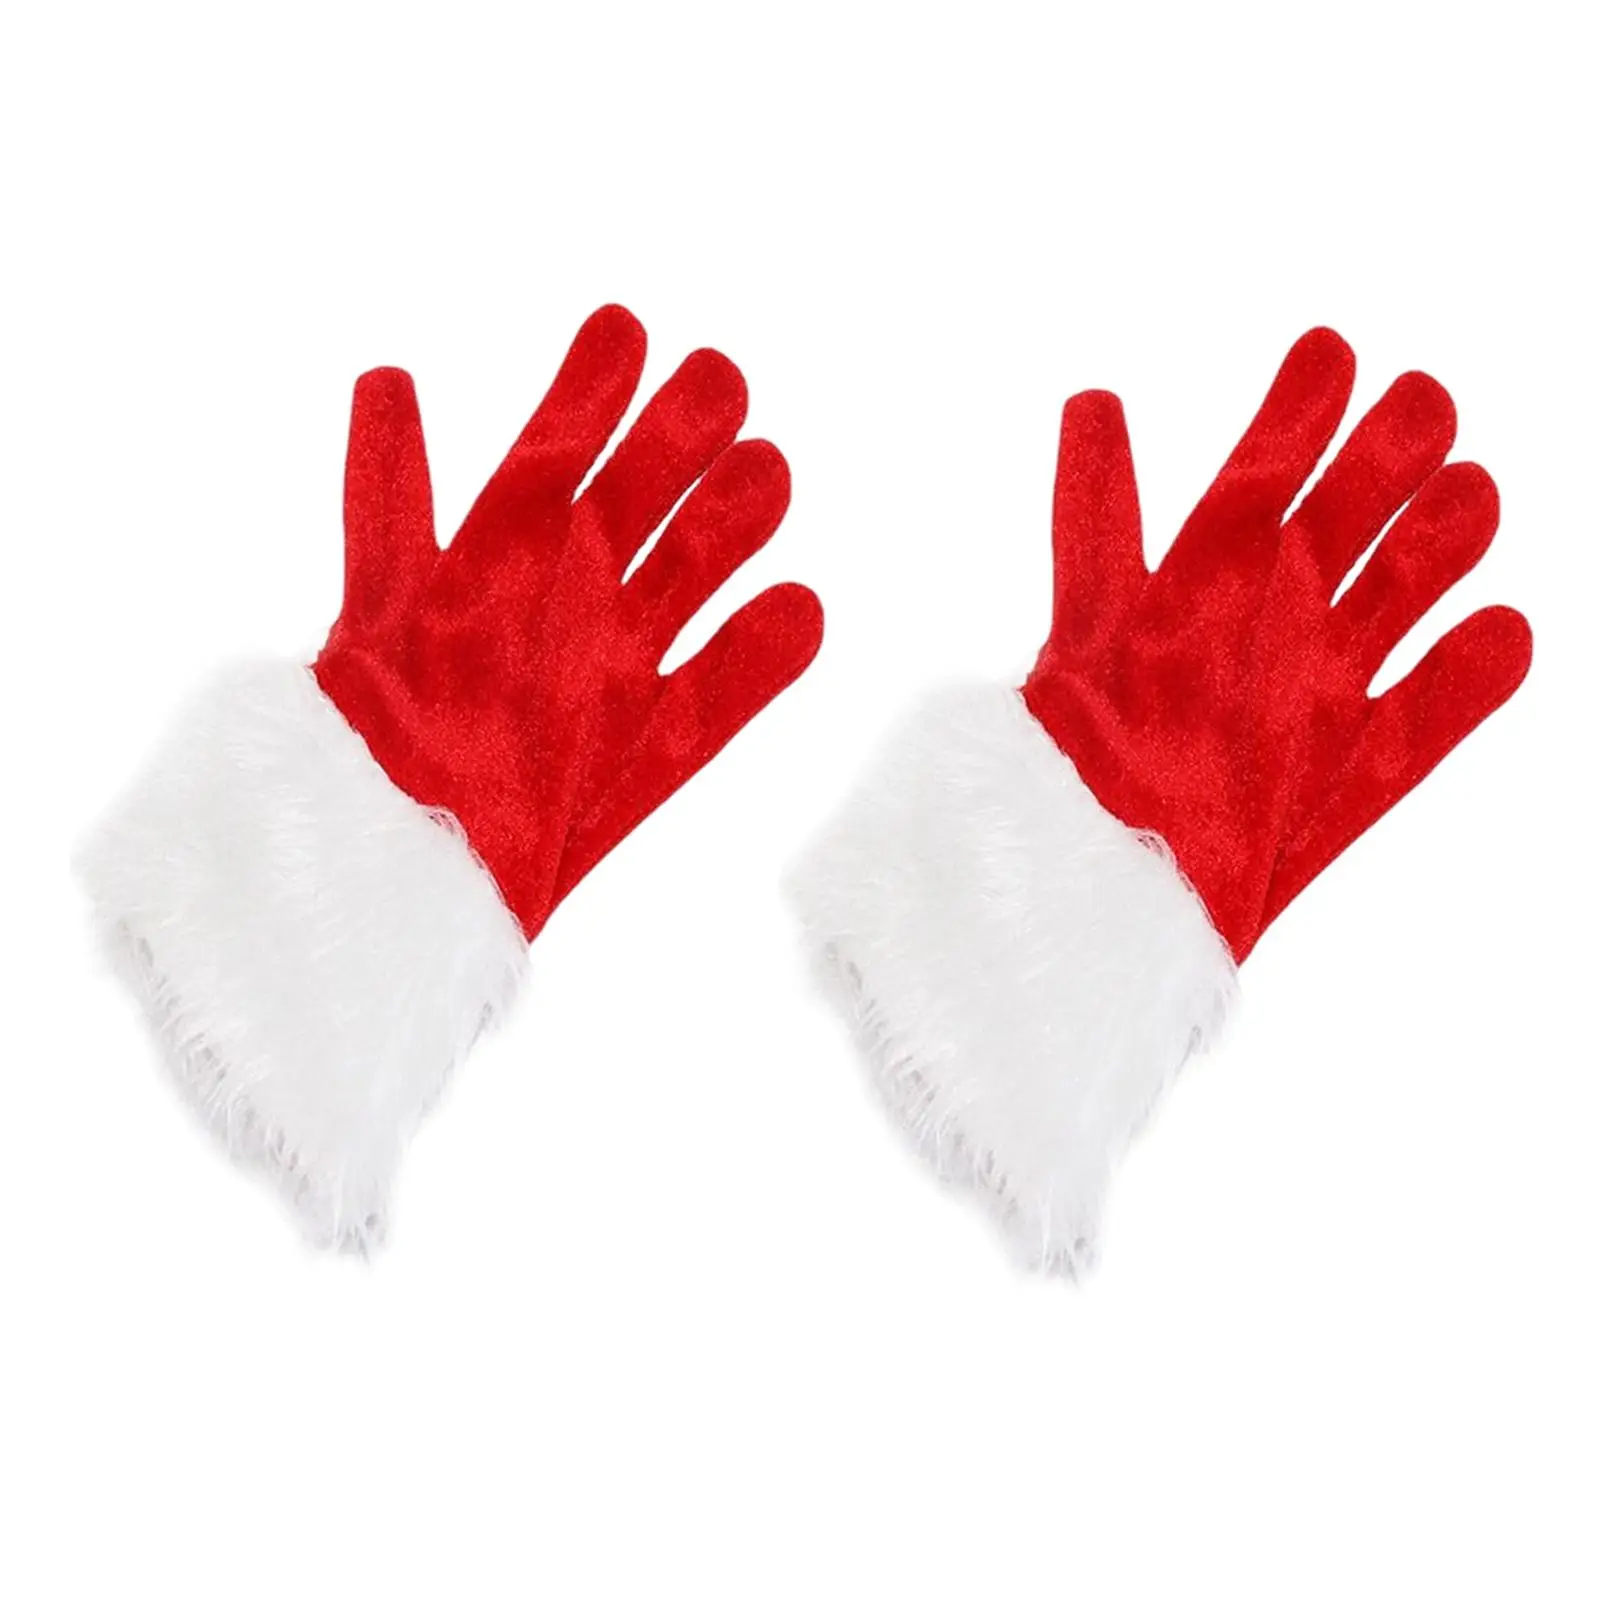 Red Gloves Winter with White Furry Elegant Multifunction Durable Short for Women, Kids Wedding Girls Cosplay Party